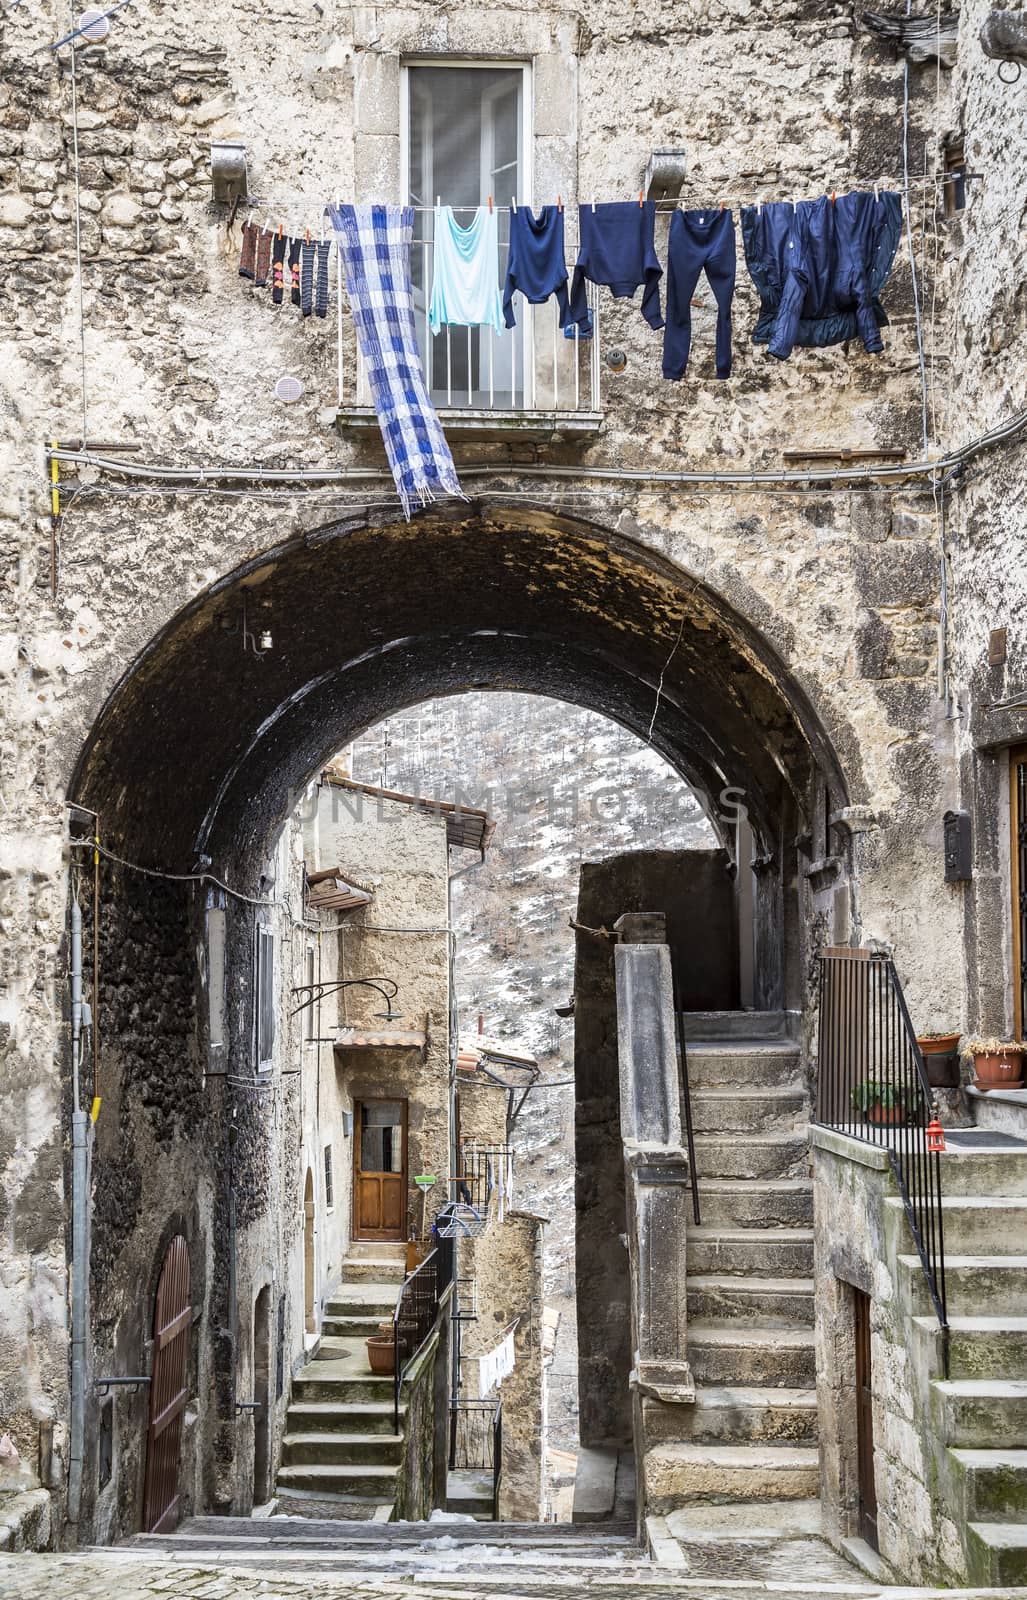 pictorial old streets of Italian villages in Abruzzi, Italy